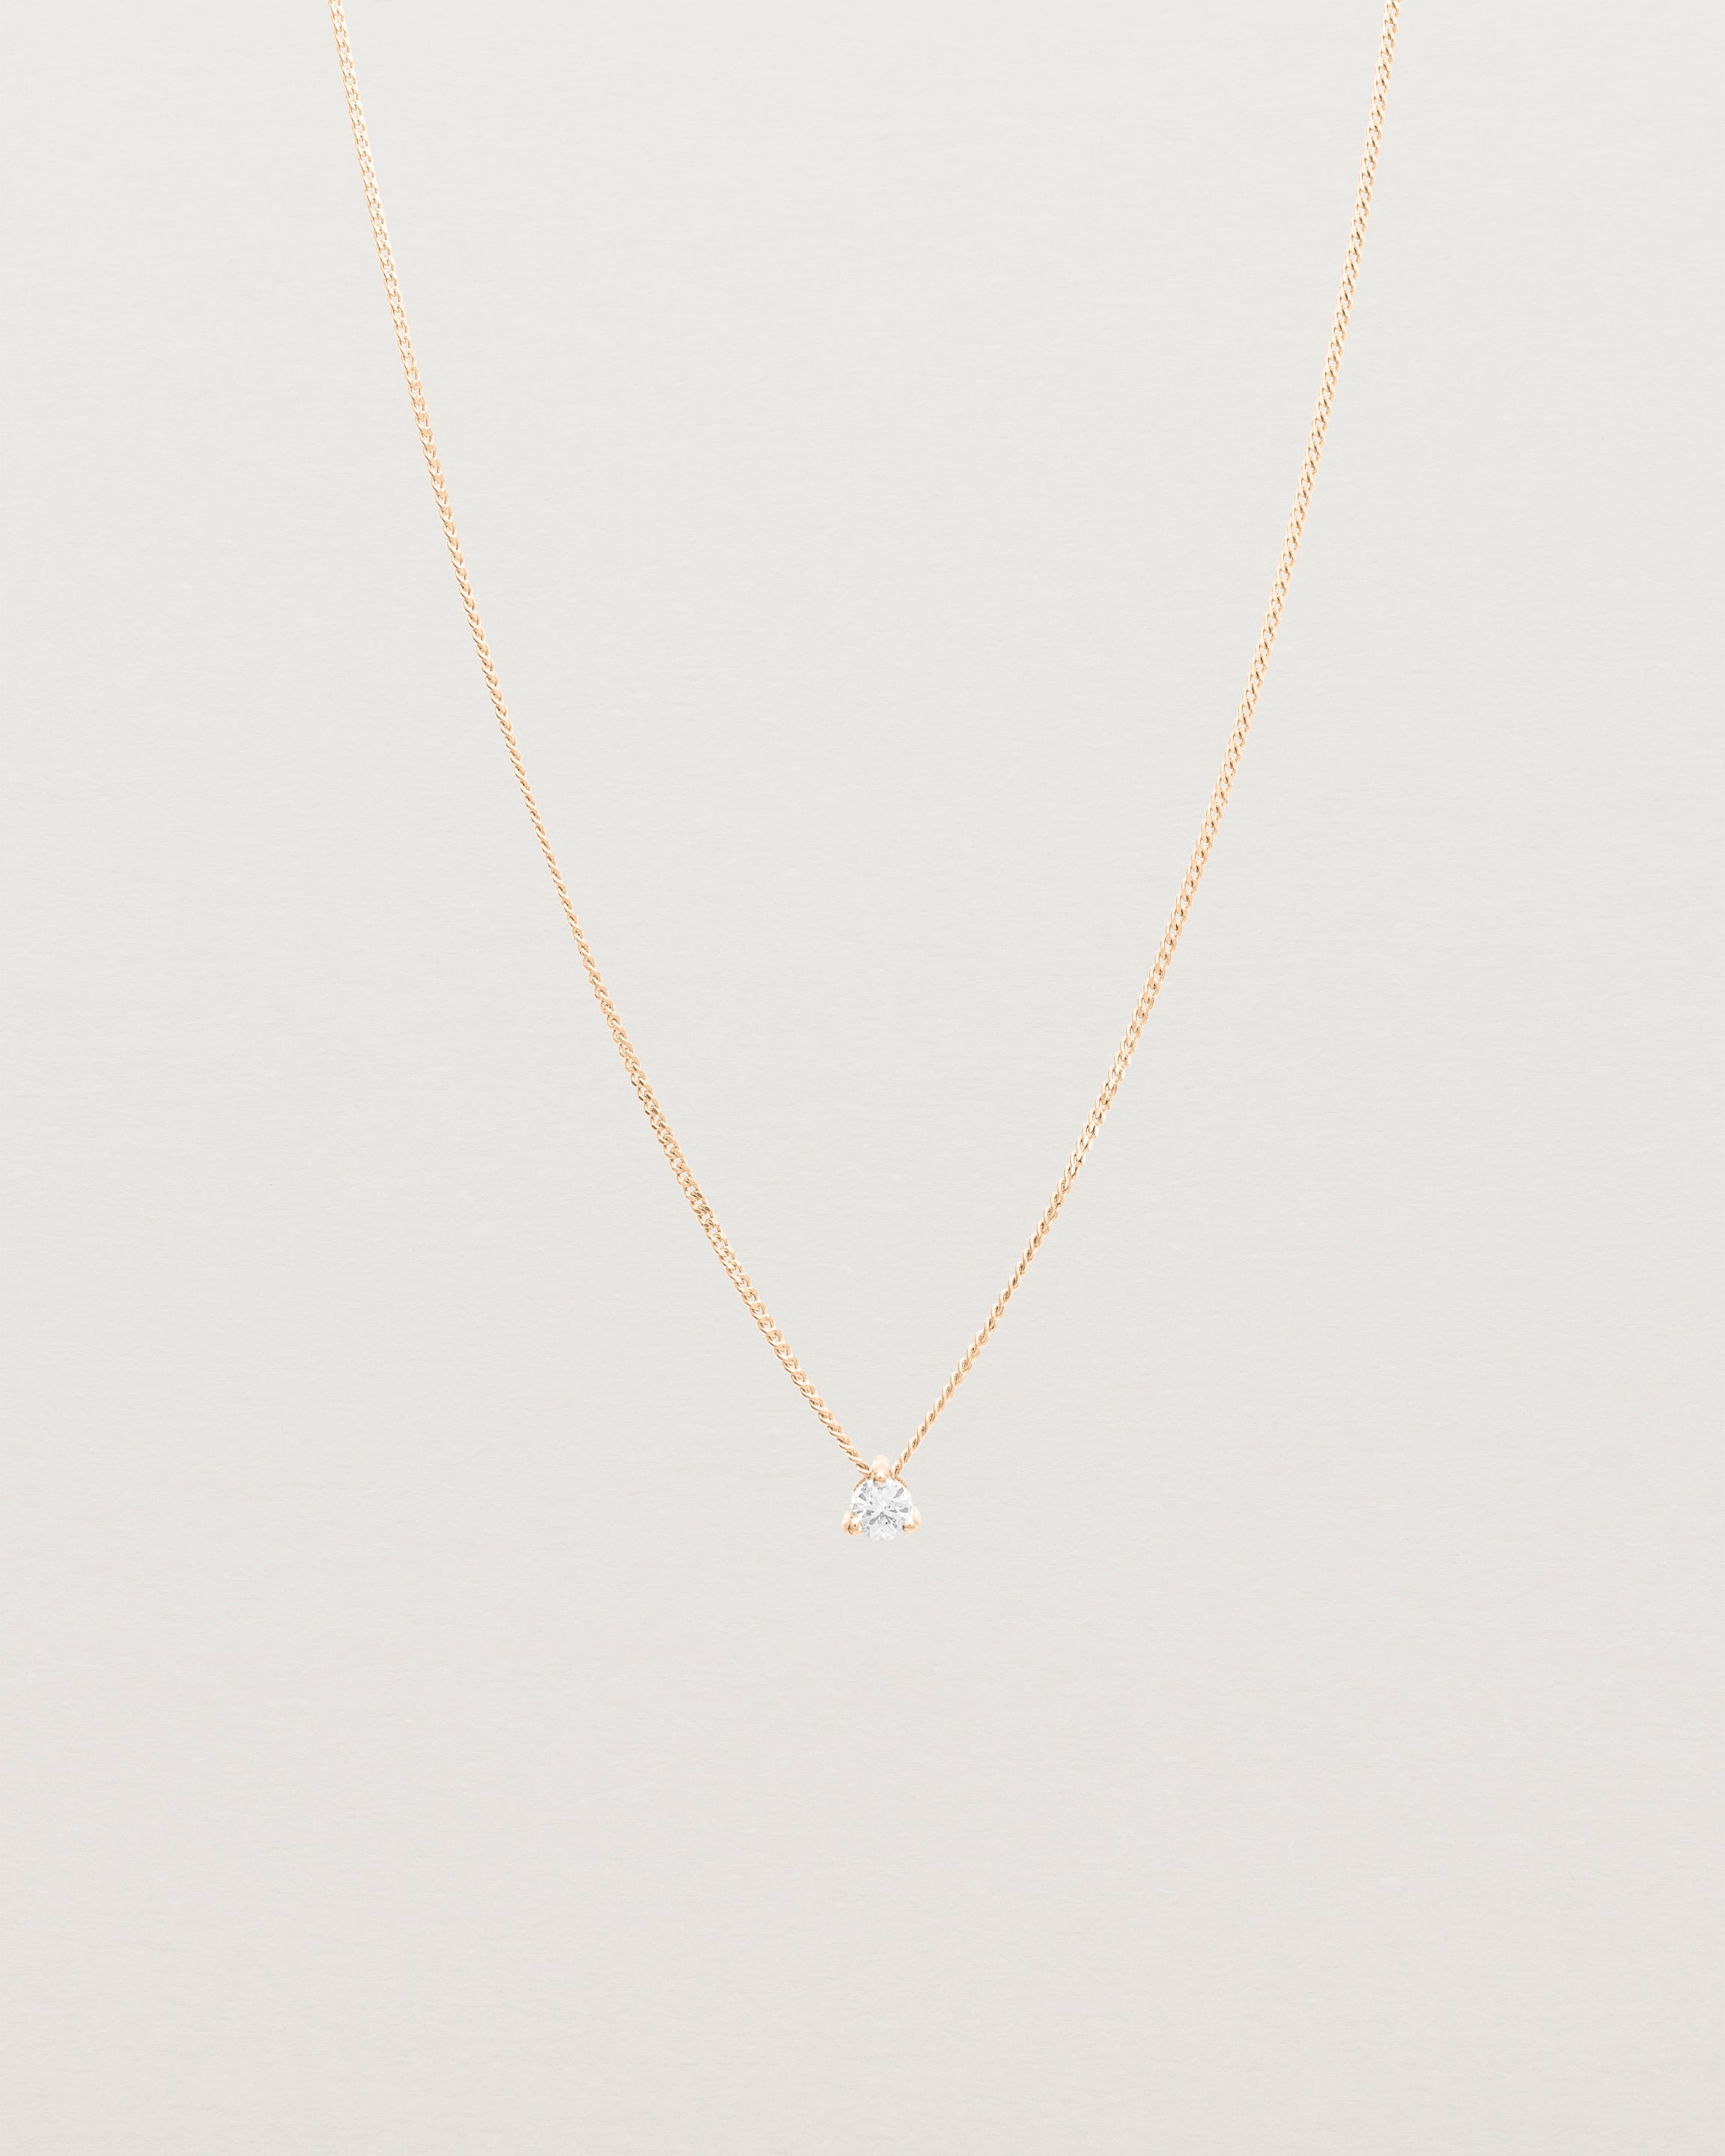 Full view of the Aiona Slider Necklace | Old Cut Diamond | Rose Gold.